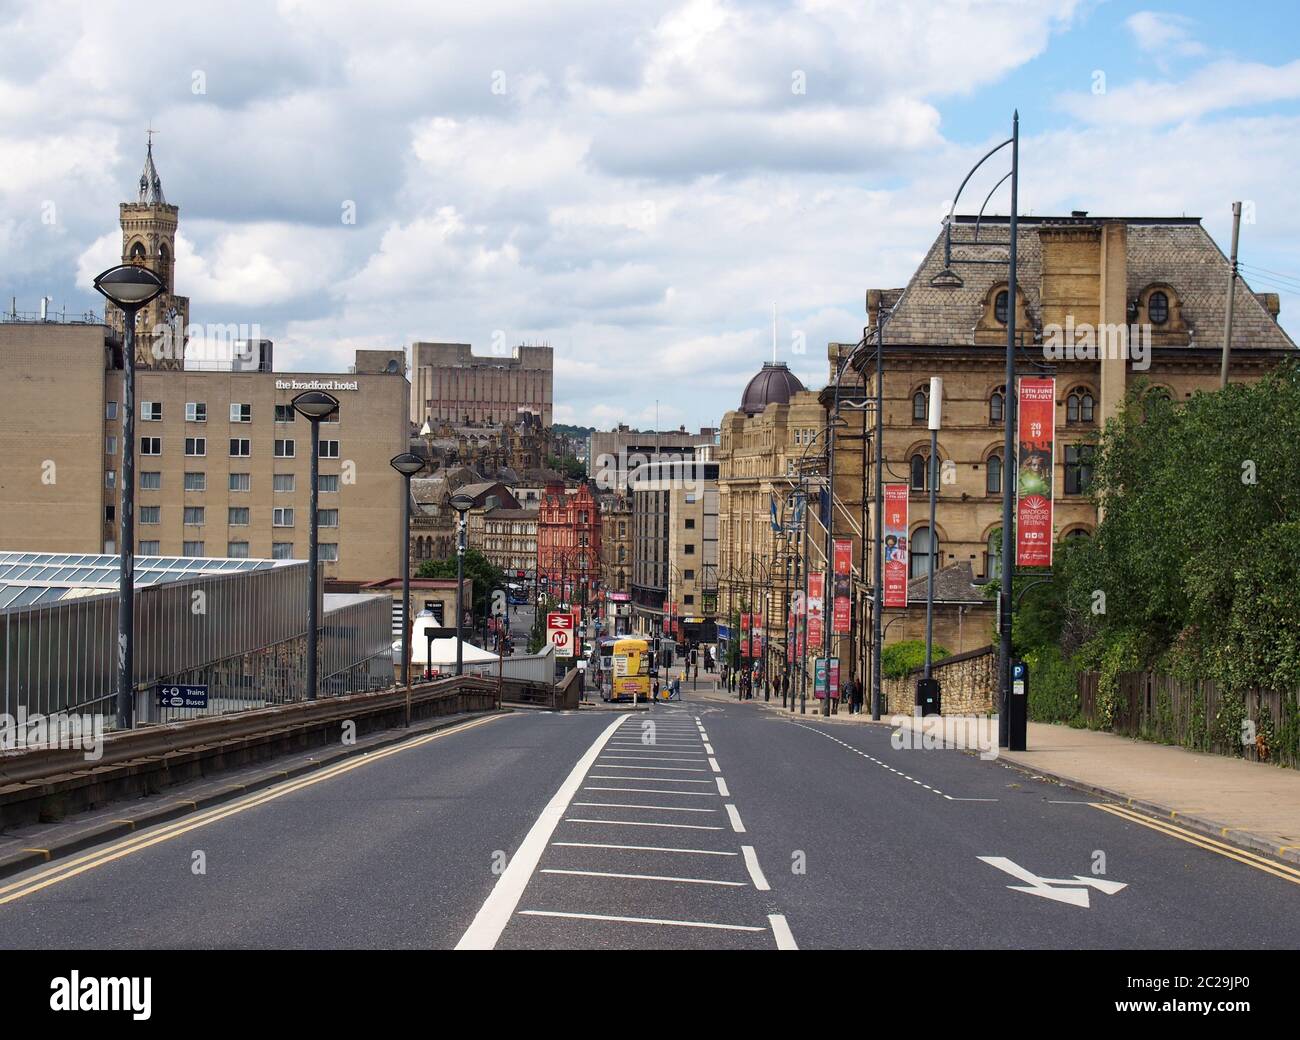 a view of bradford city center from bridge street next to the interchange with hotels and shops visible at the bottom of the roa Stock Photo